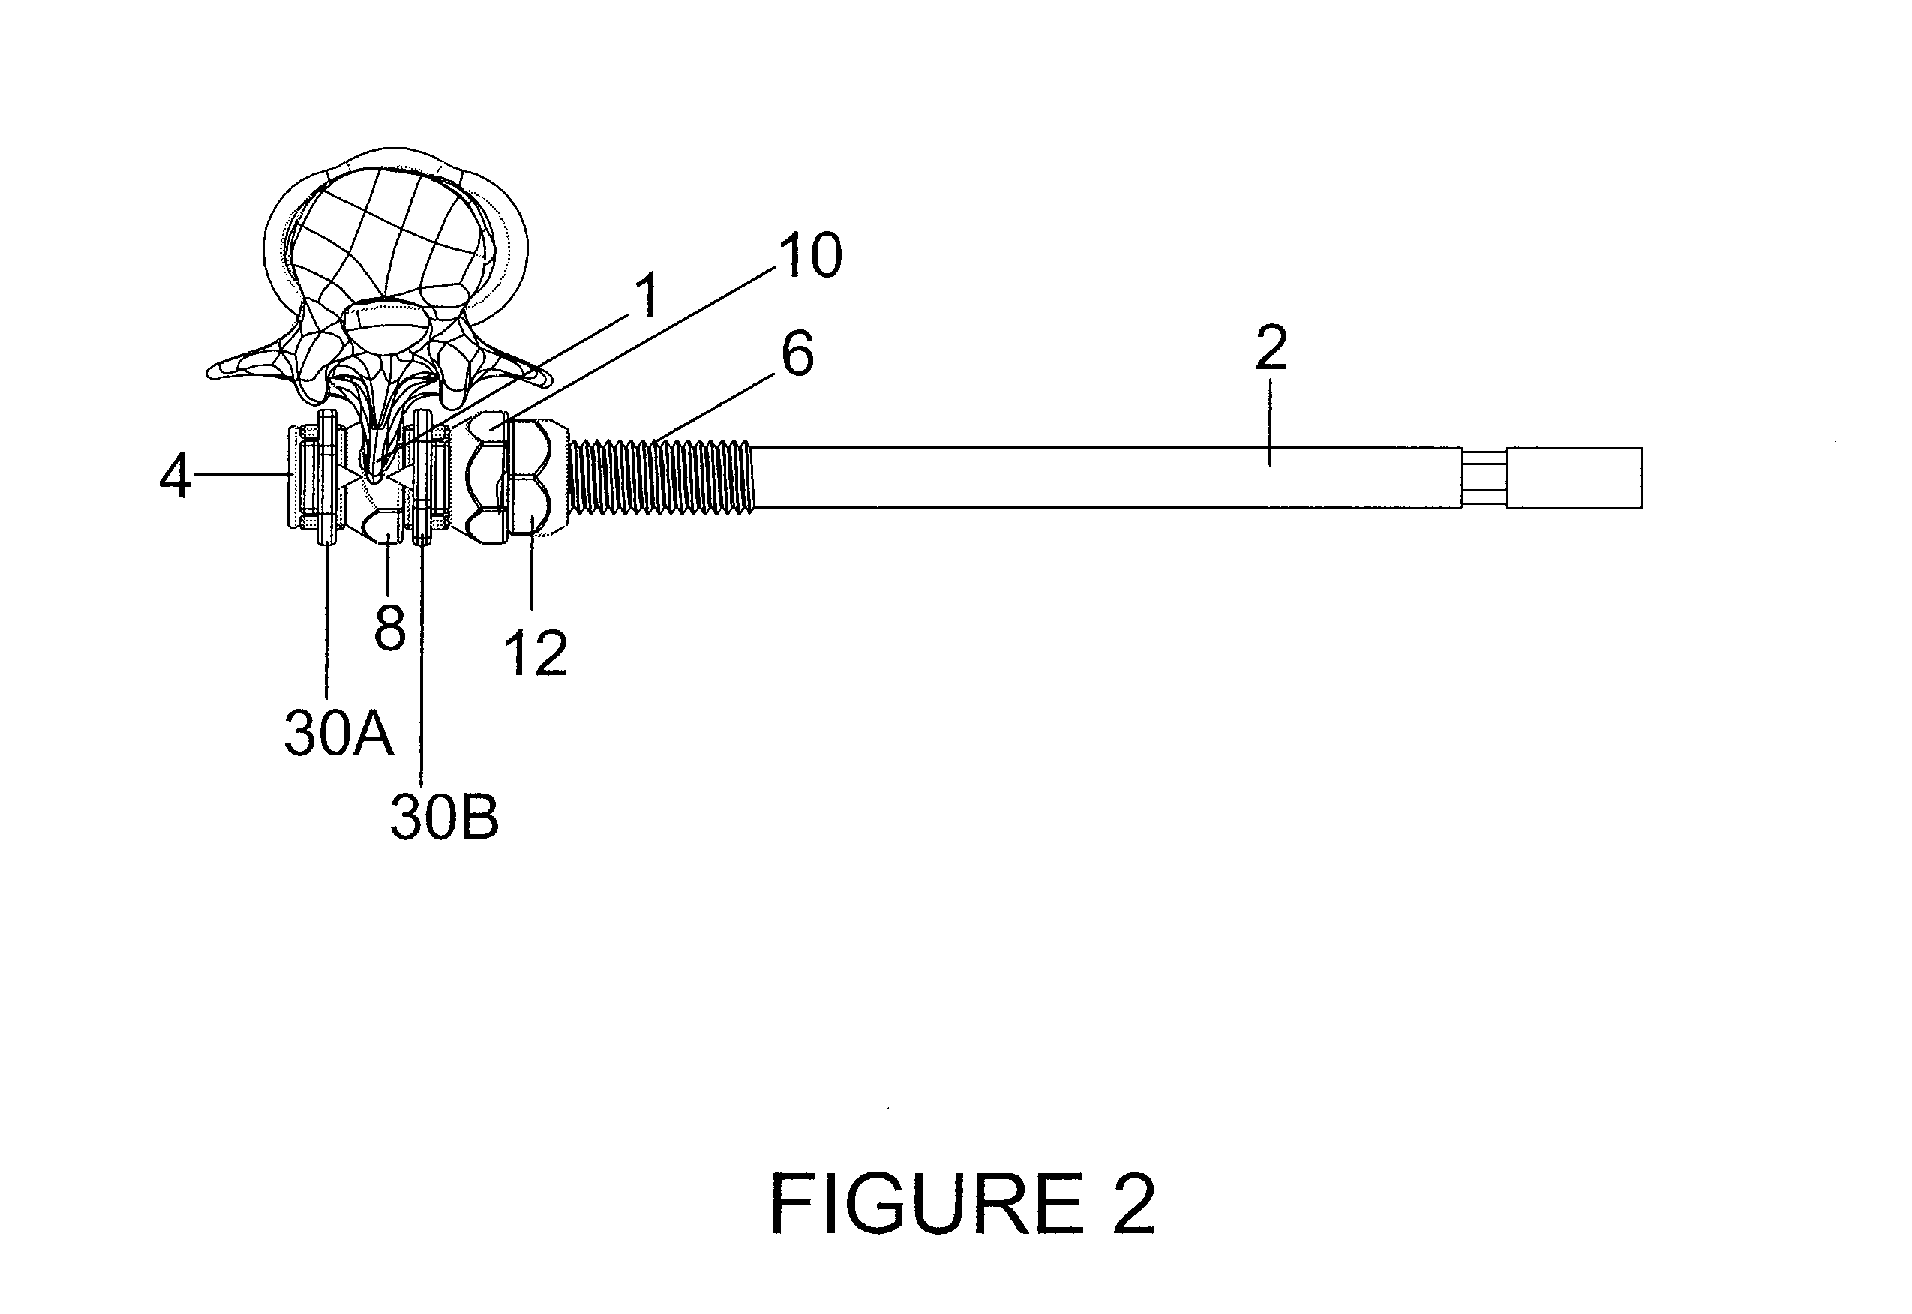 Spinous process fixation plate and minimally invasive method for placement